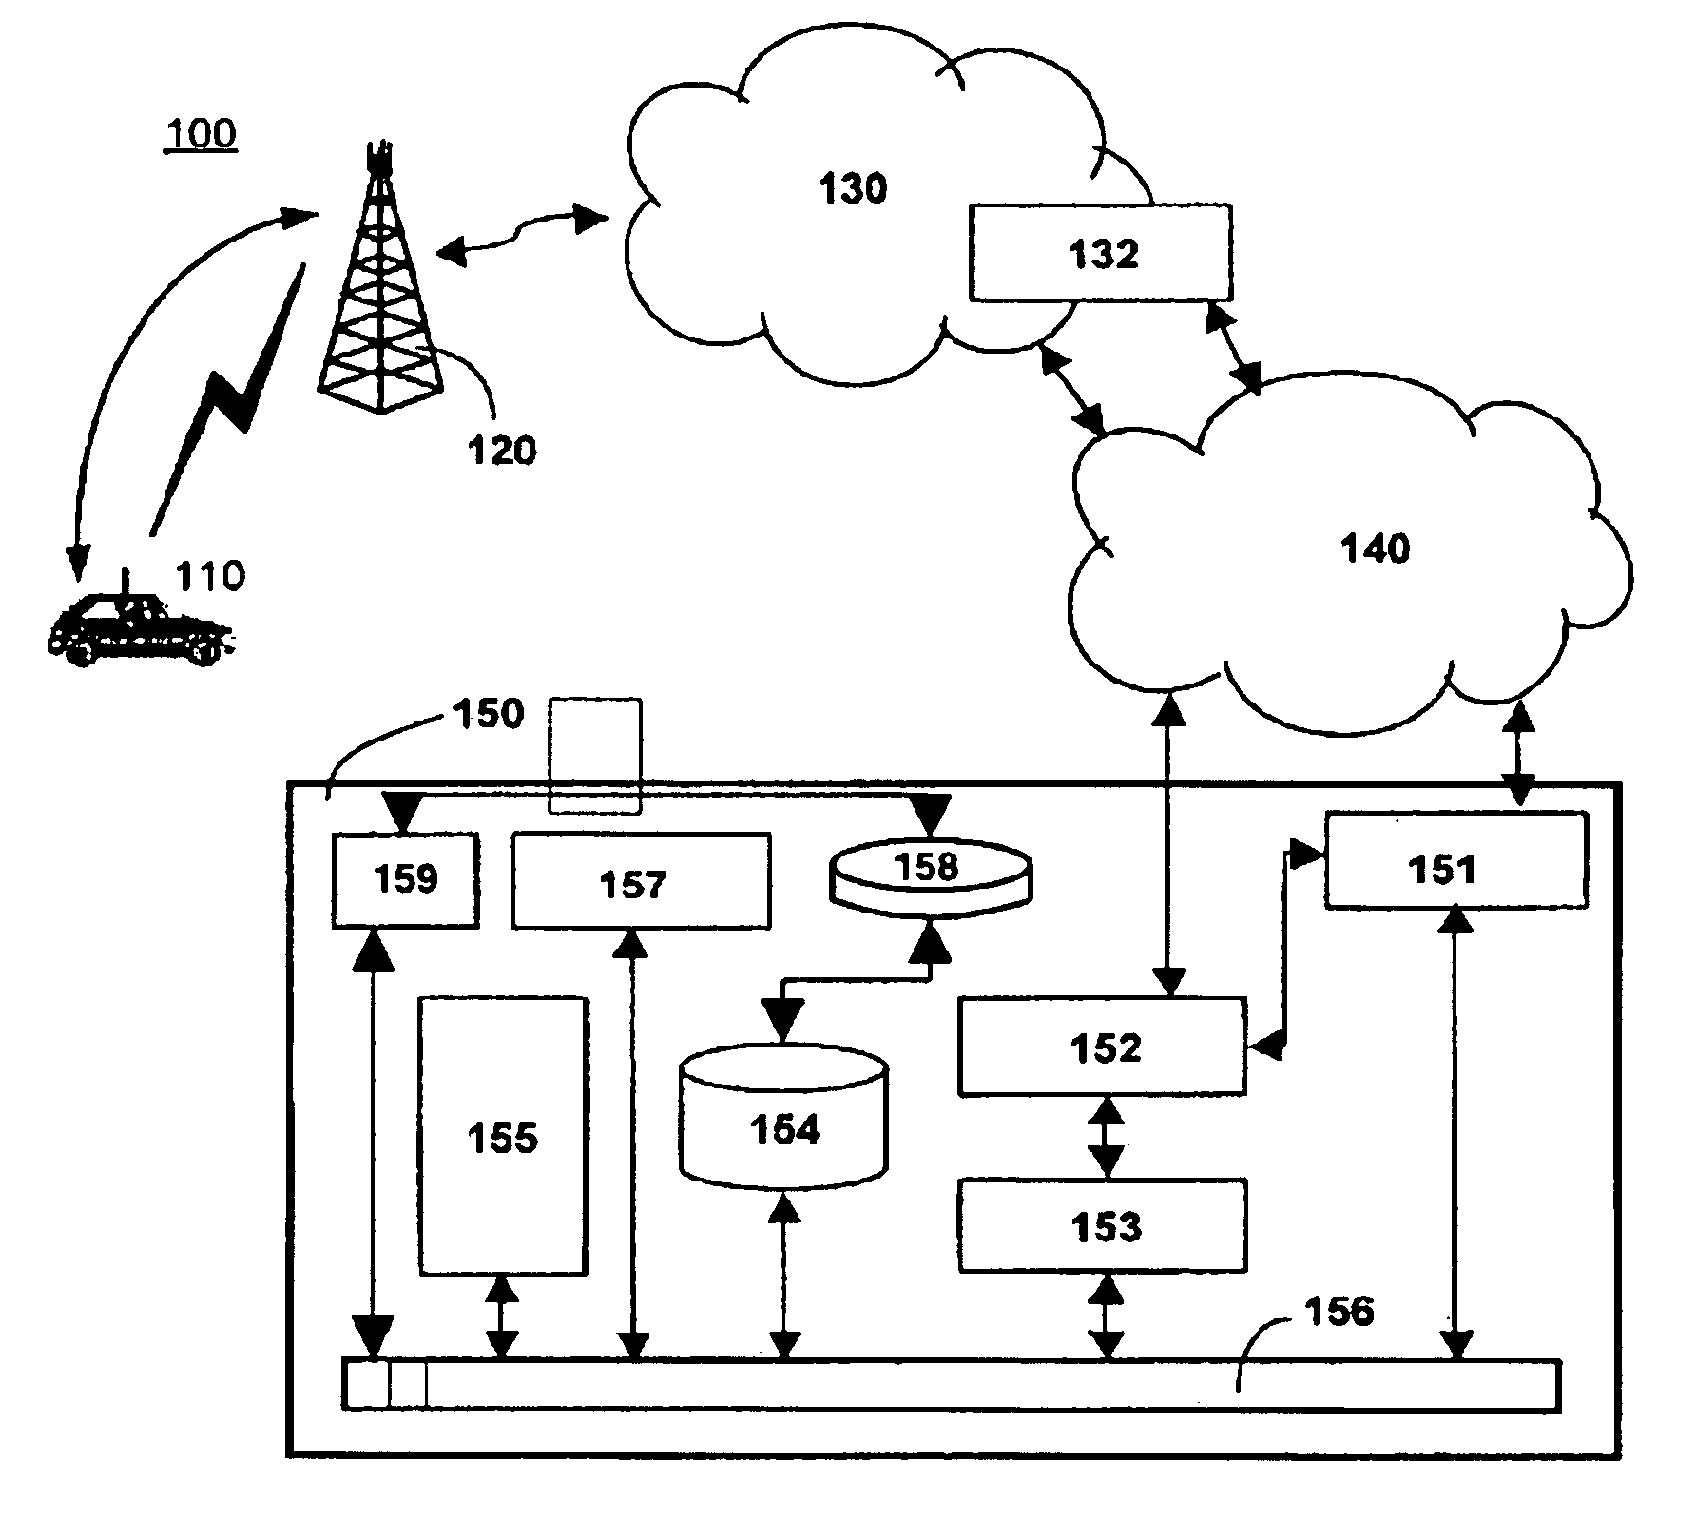 System and method of communicating traffic information